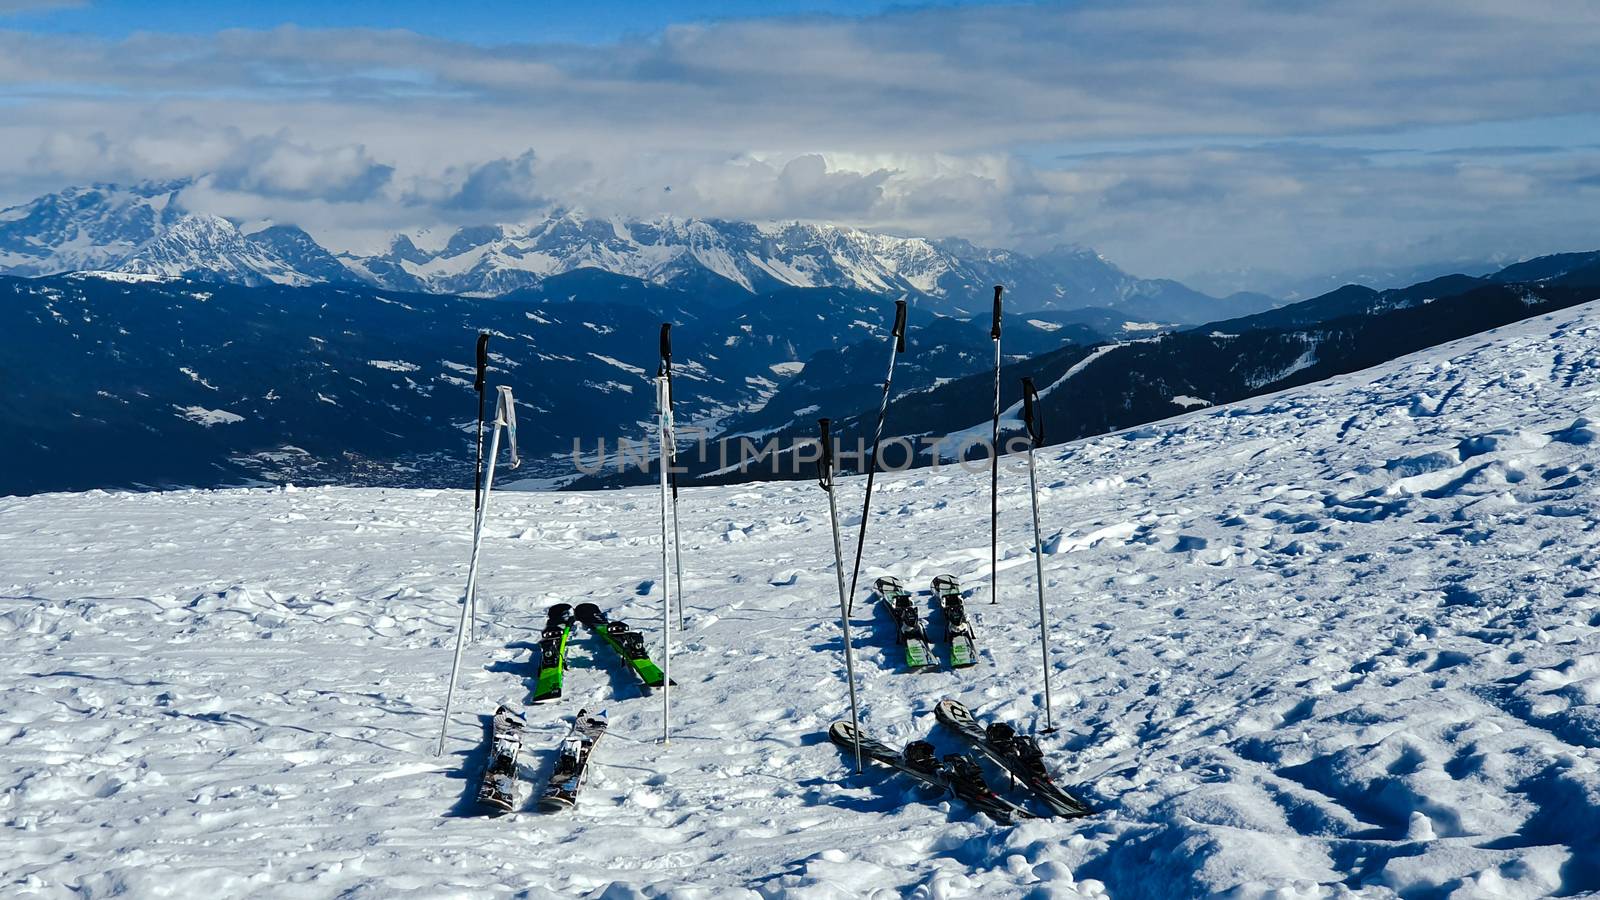 Skis In The Snow on Ski Piste With Against snowy Mountains by TheDutchcowboy